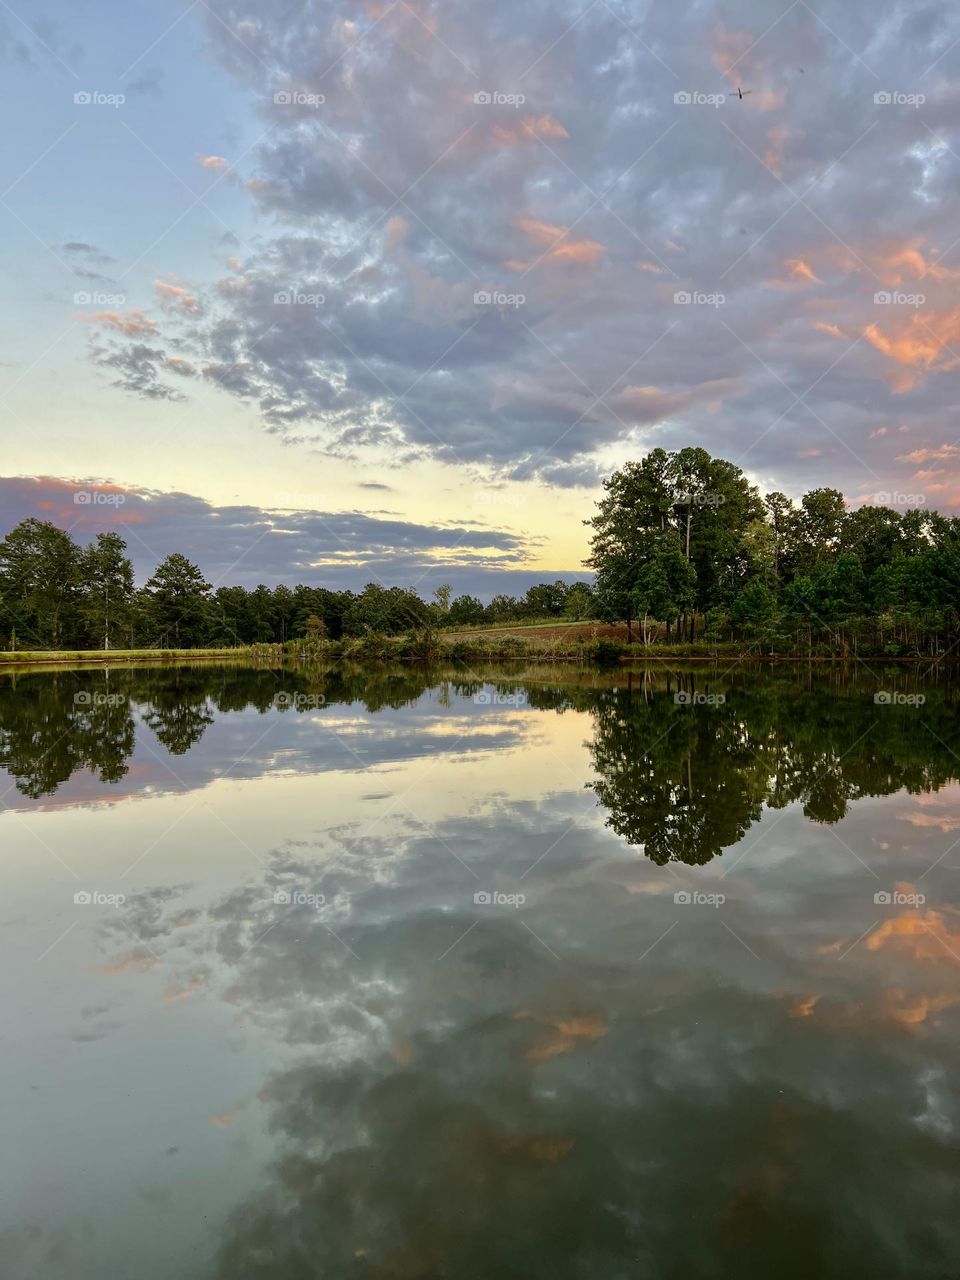 Late afternoon sunlight paints pink and violet highlights on the clouds, making them the star of the show. Beauty is doubled as the countryside sky is reflected in the still waters of the pond.